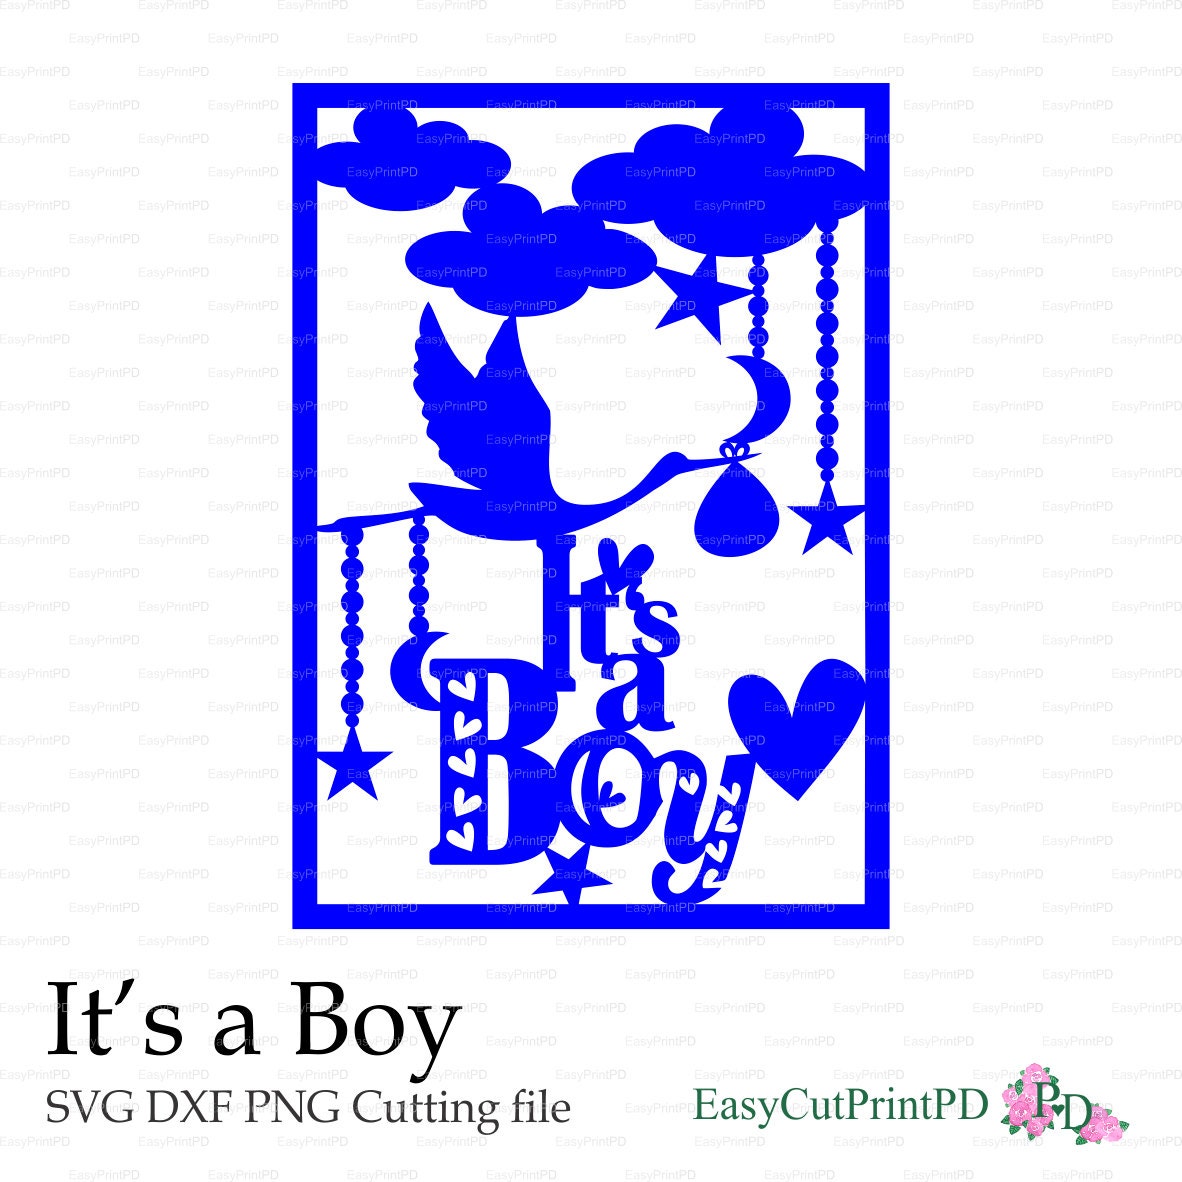 Download New Baby It's a Boy card paper cut svg dxf eps png